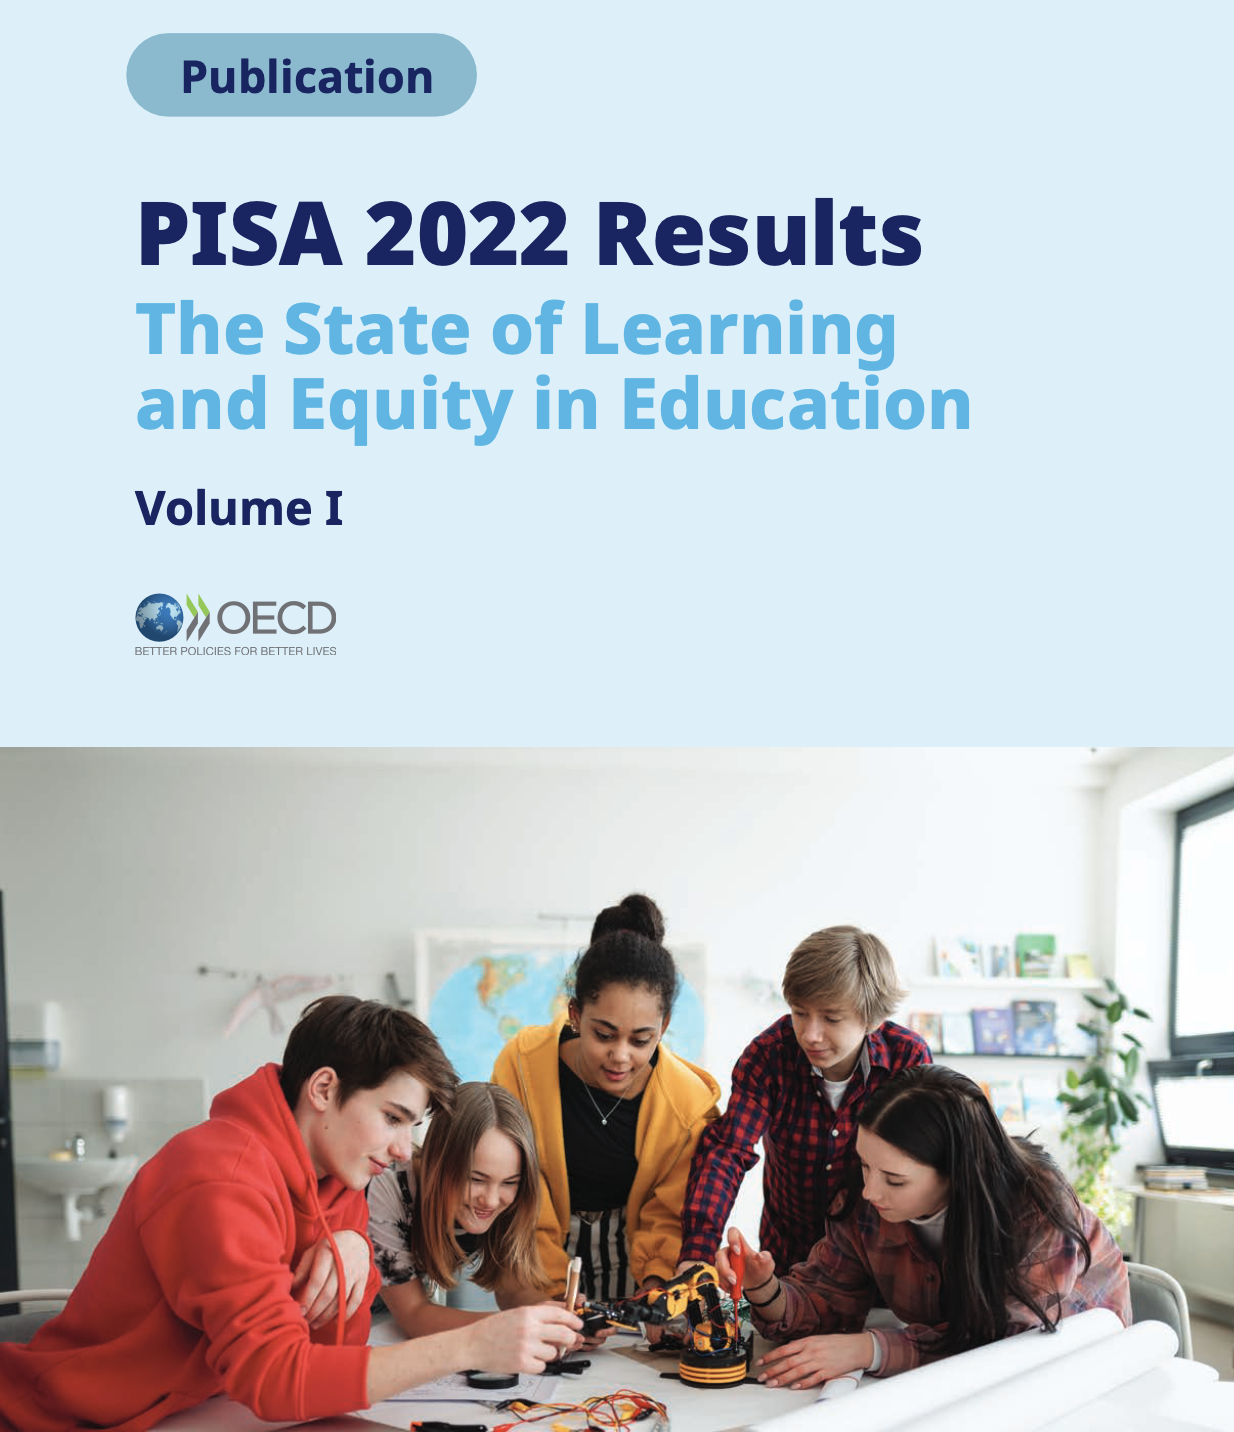 Reflections on PISA 2022 Results Post feature image